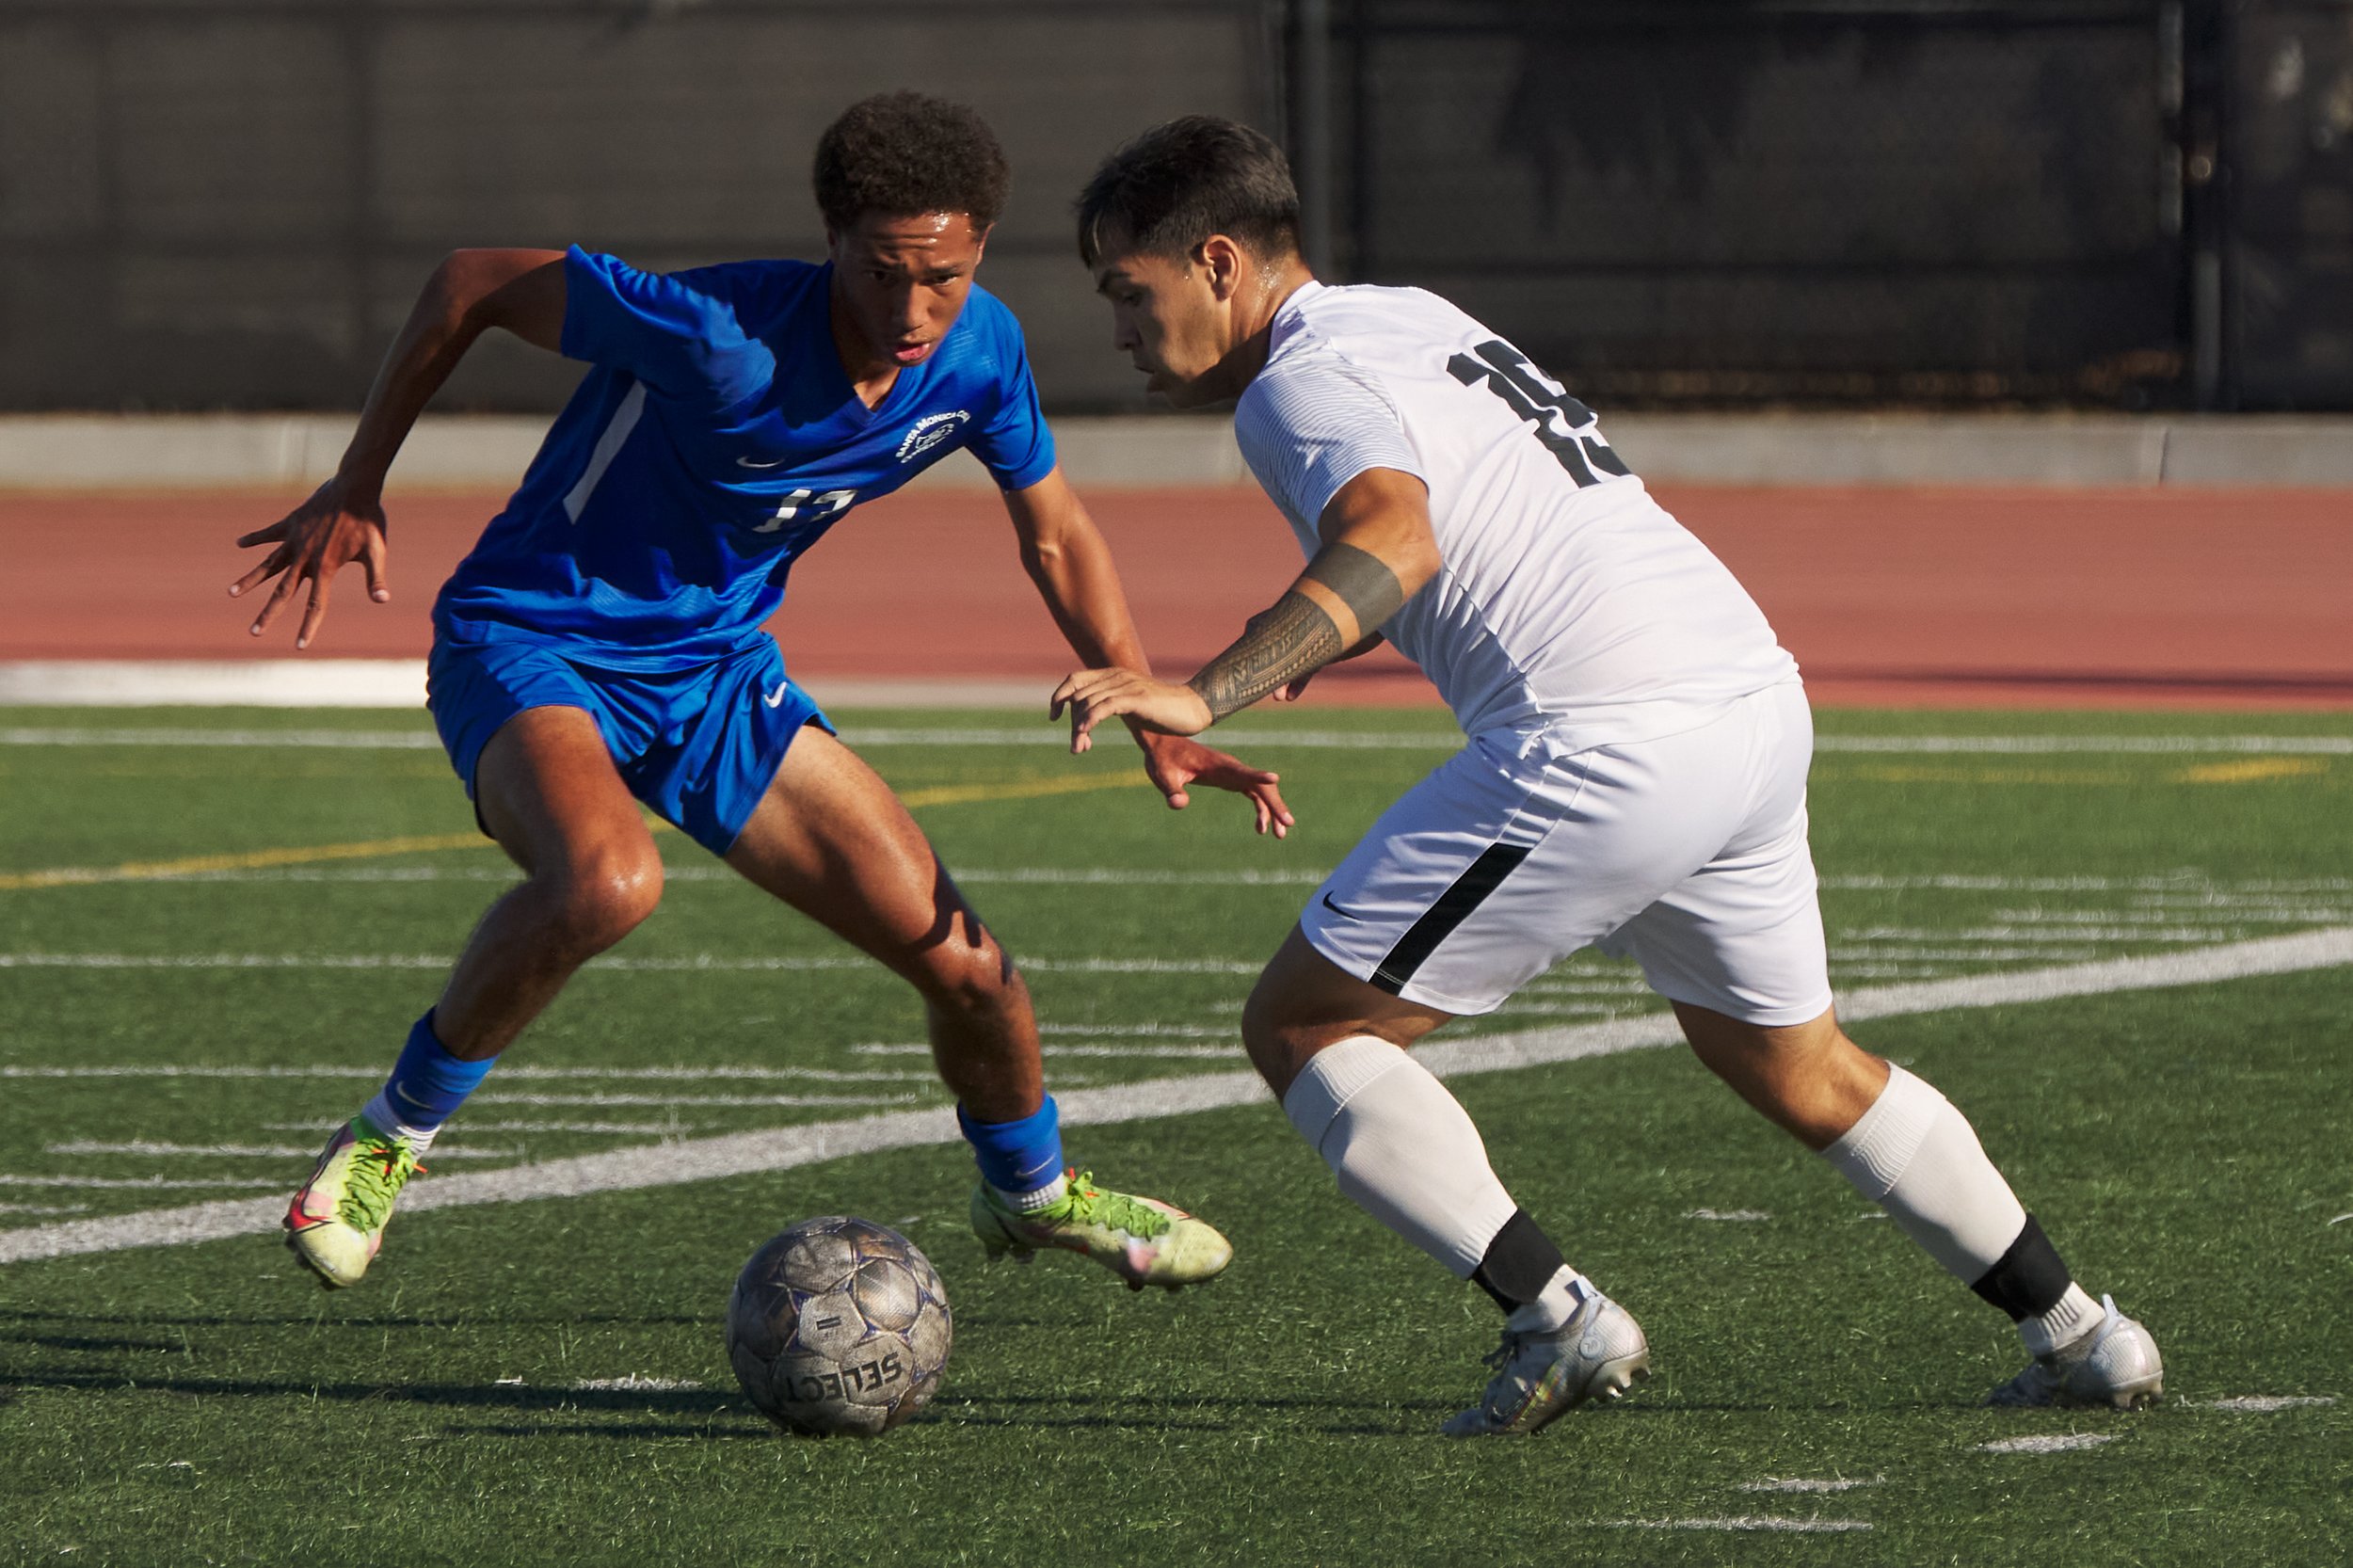  Santa Monica College Corsairs' Connor Gilmore and Rio Hondo College Roadrunners' Oscar Velez during the men's soccer match on Friday, Sept. 24, 2022, at Corsair Field in Santa Monica, Calif. The Corsairs won 2-1. (Nicholas McCall | The Corsair) 